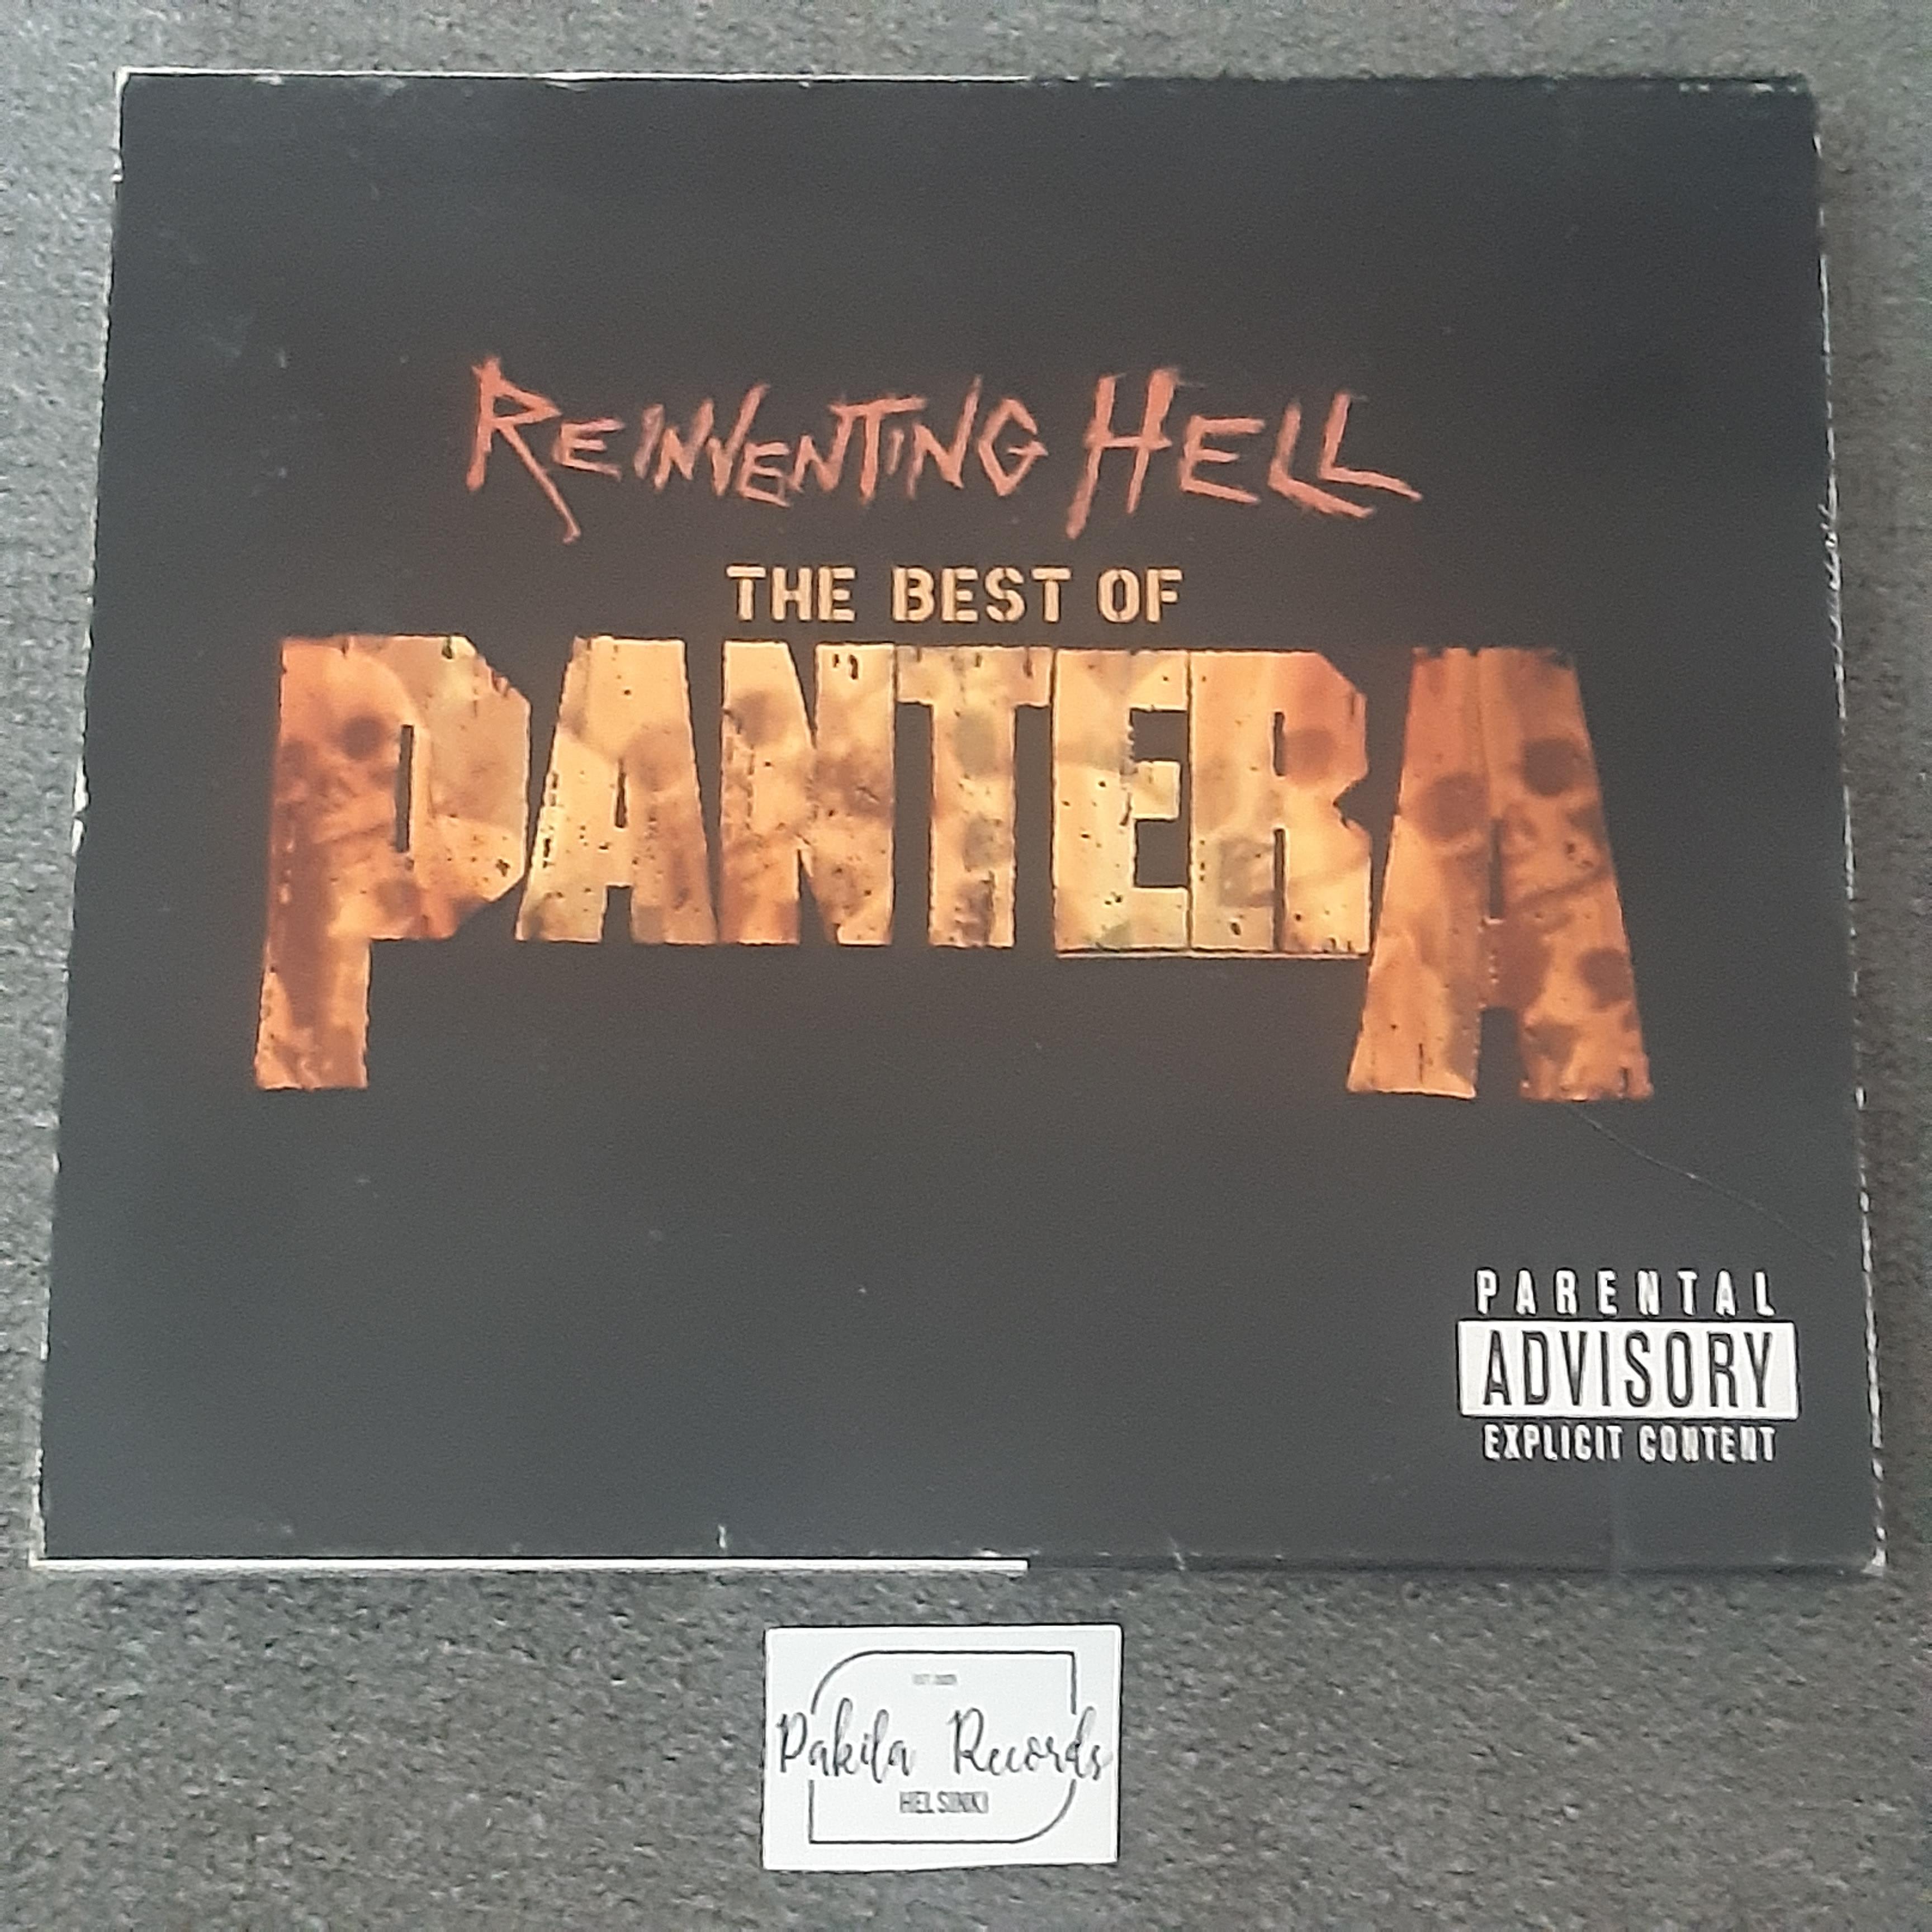 Pantera - Reinventing Hell, The Best Of - CD + DVD (käytetty)